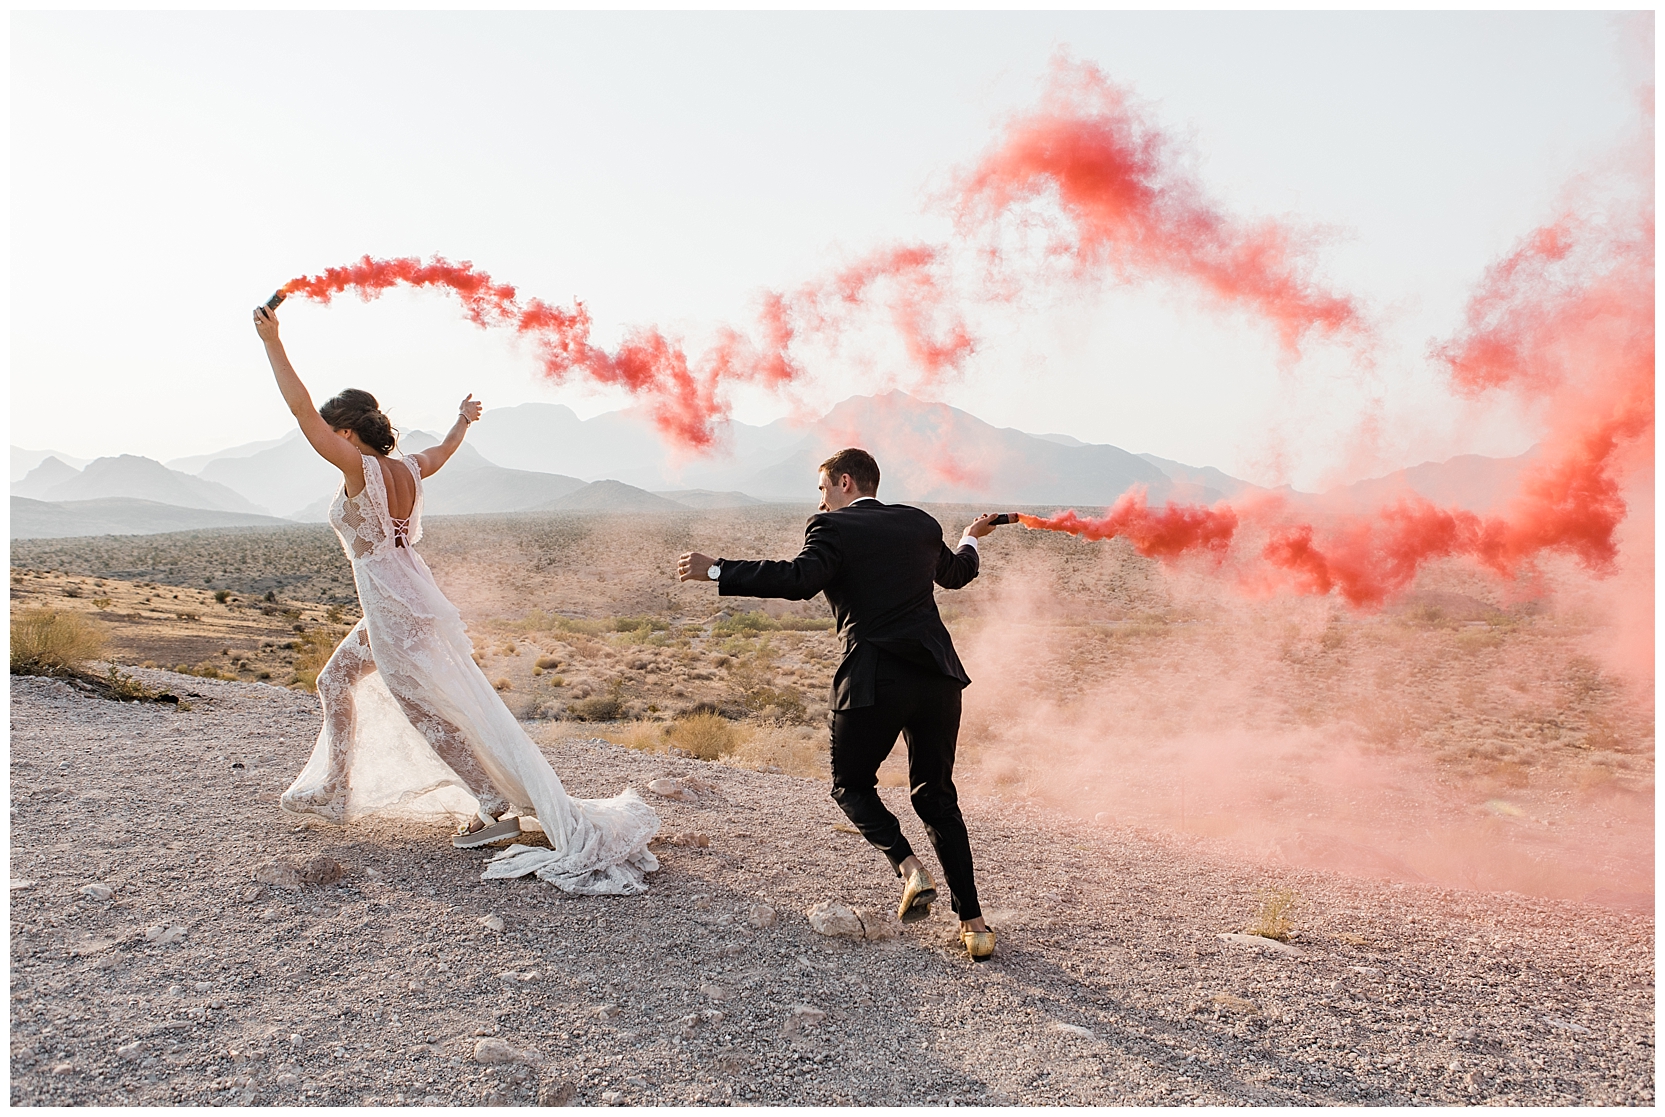 Las Vegas Elopement | Wedding Photos at Red Rock Canyon National Park| photo by Lindsey Ramdin, L.A.R. Weddings